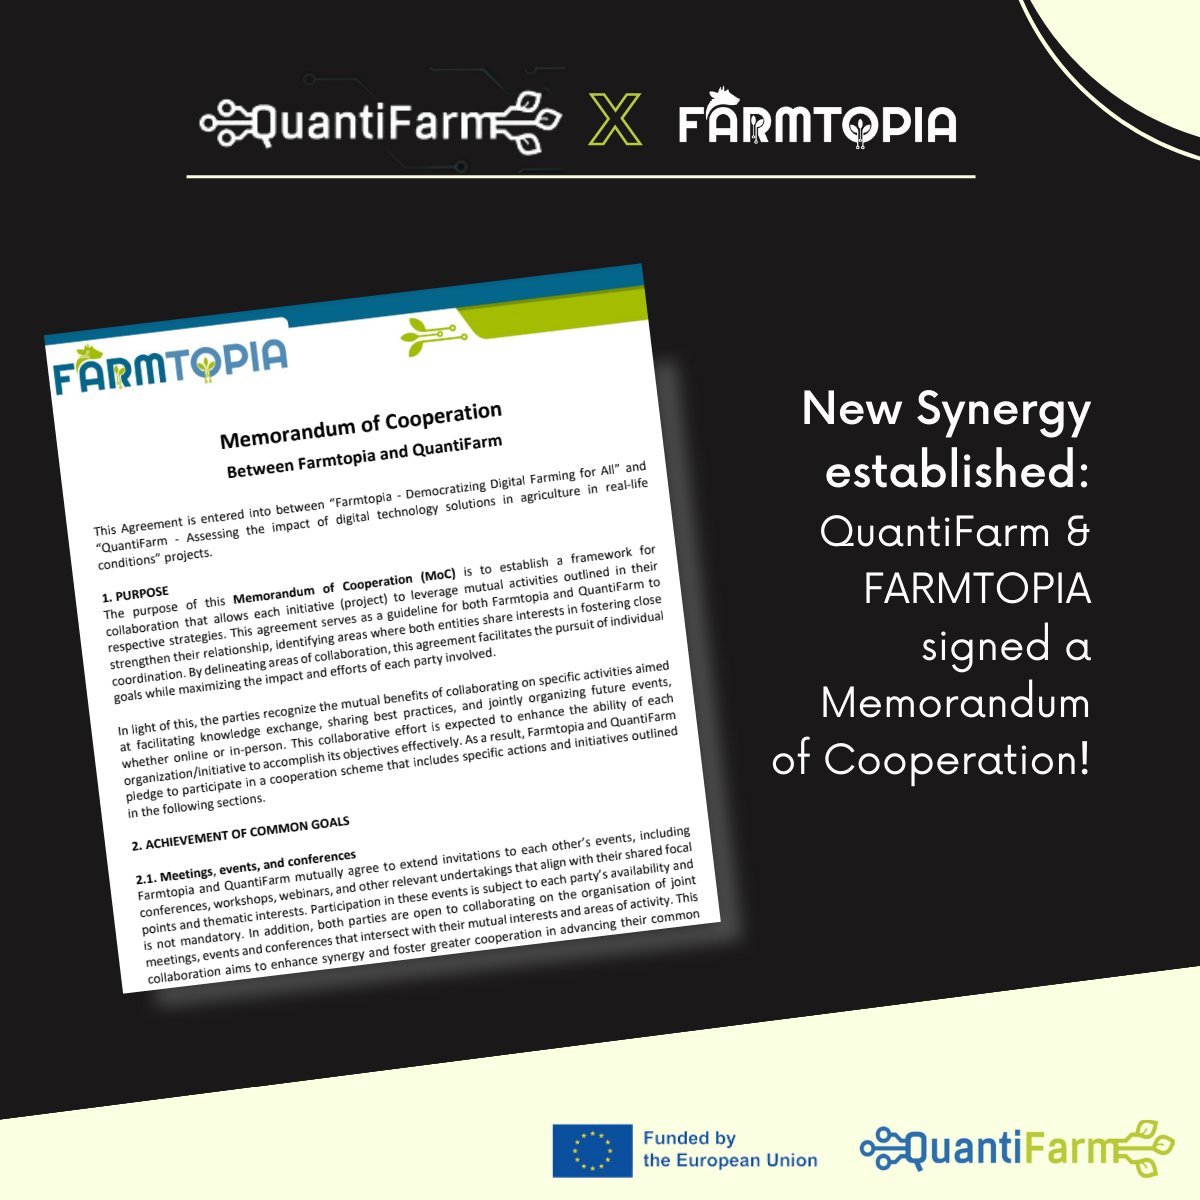 🚀 𝐍𝐞𝐰 𝐜𝐨𝐥𝐥𝐚𝐛𝐨𝐫𝐚𝐭𝐢𝐨𝐧: QuantiFarm has signed a 𝑀𝑒𝑚𝑜𝑟𝑎𝑛𝑑𝑢𝑚 𝑜𝑓 𝐶𝑜𝑜𝑝𝑒𝑟𝑎𝑡𝑖𝑜𝑛 with the EU project Farmtopia, with which we share the same passion for #digitalfarming and innovation! 🌿 Looking forward to join forces with @Farmtopia_EU-stay tuned!